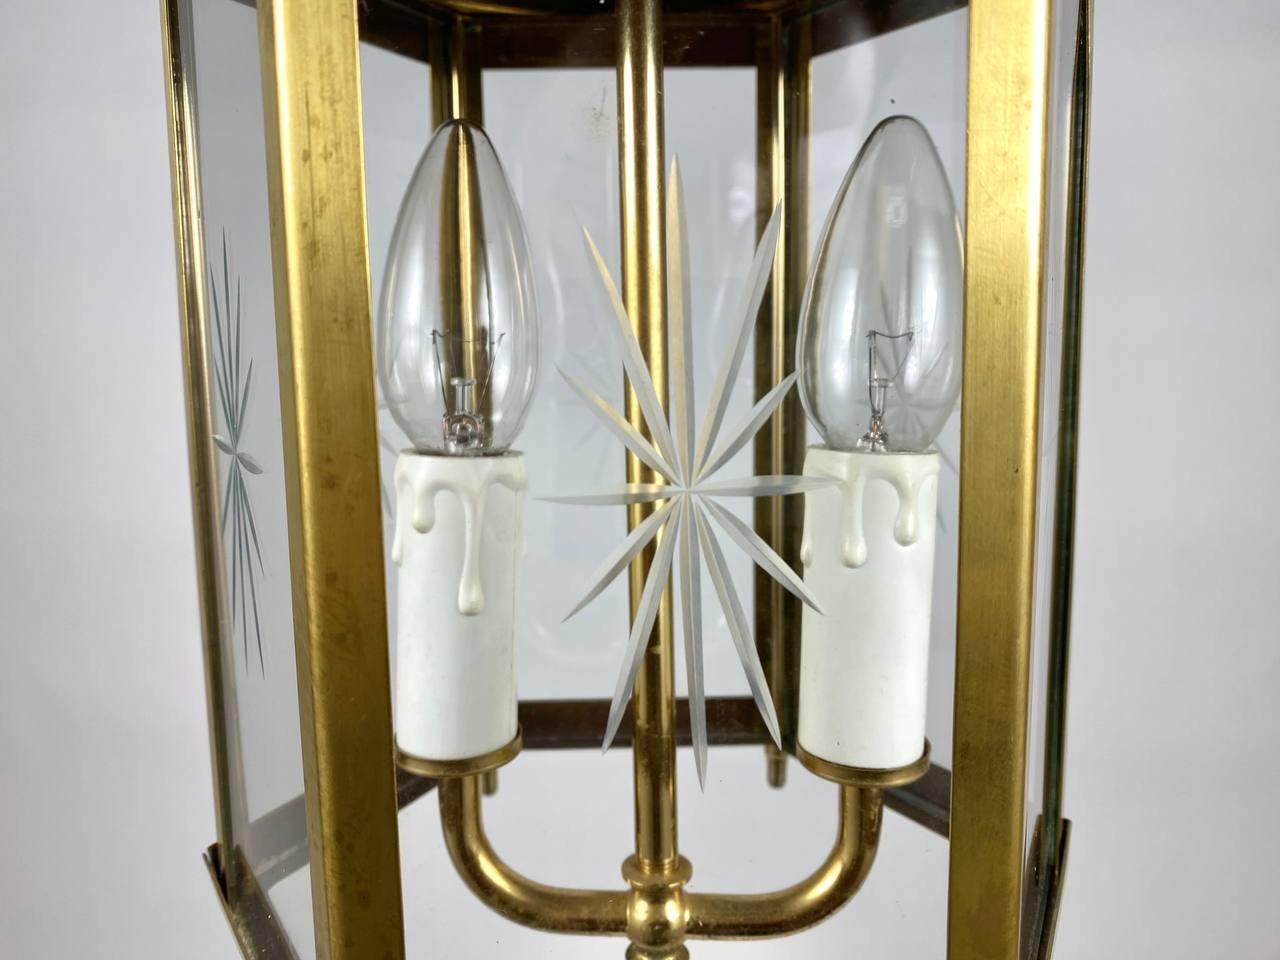 Vintage 2 Light Electric Lantern, 1980s, Brass and Beveled Glass For Sale 1